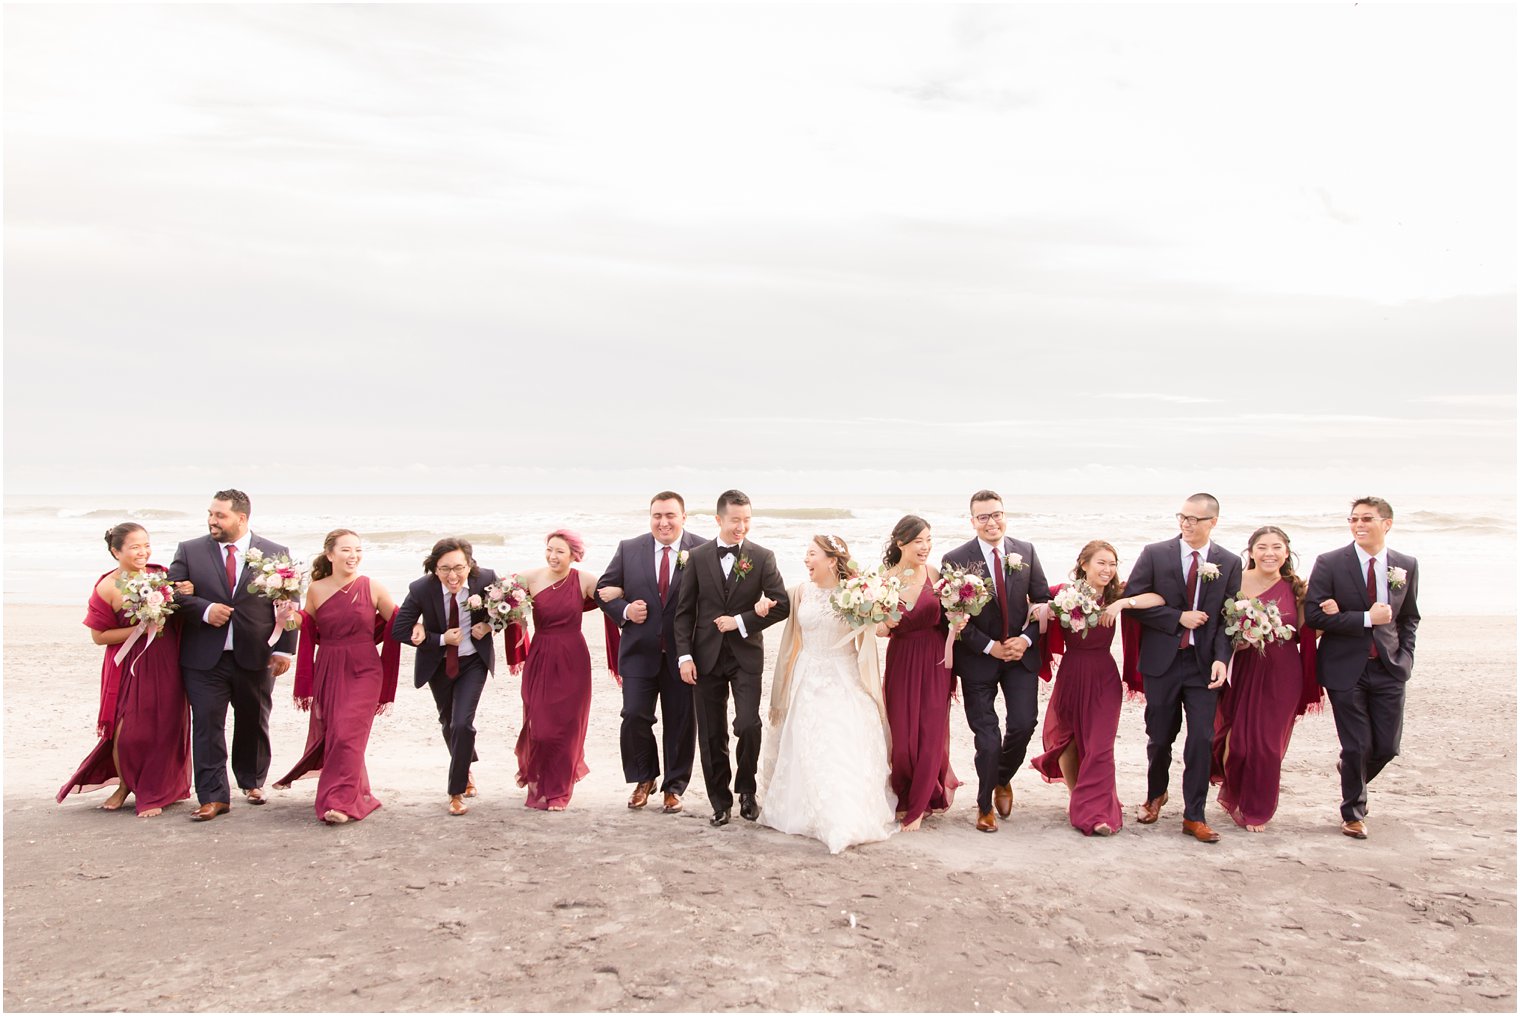 Candid photo of bridal party in Atlantic City